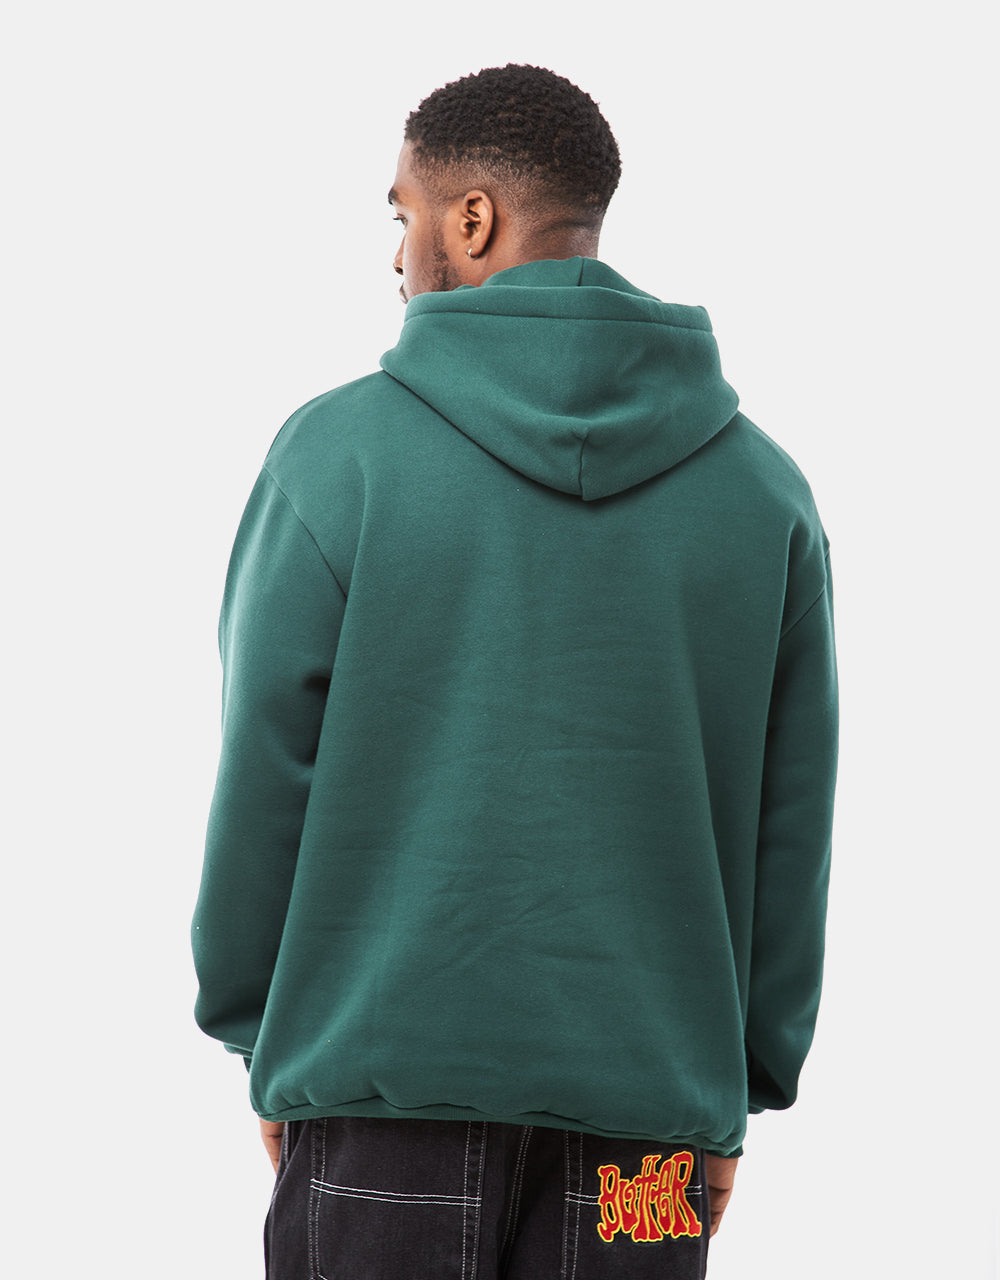 Butter Goods Fabric Applique Pullover Hoodie - Forest